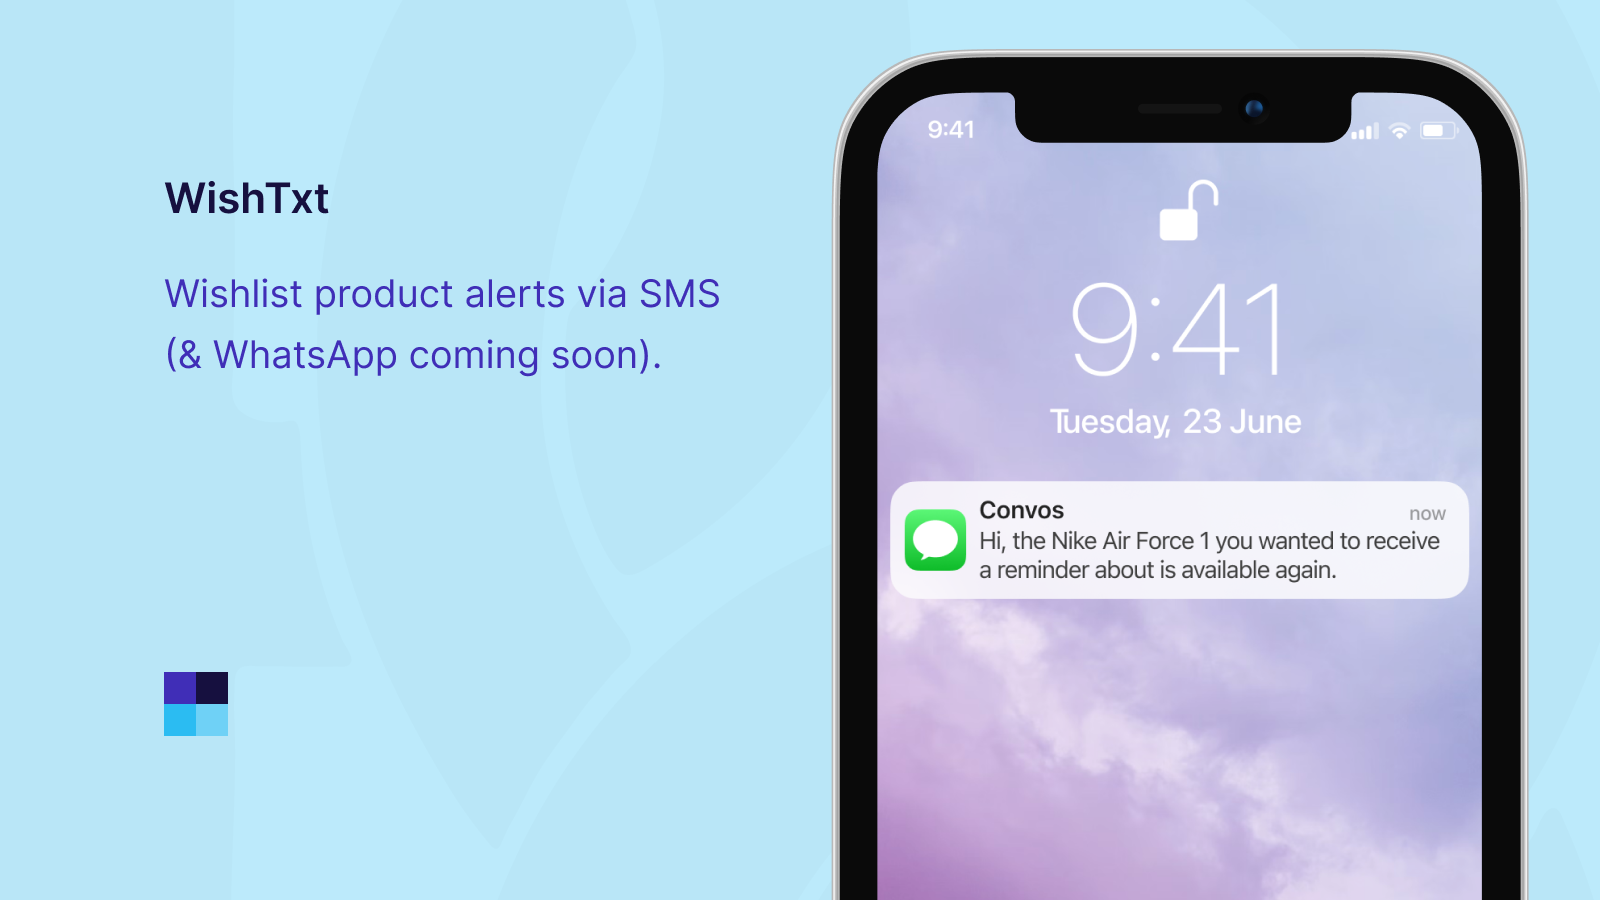 WishTxt: Product notifications via SMS for wishlists